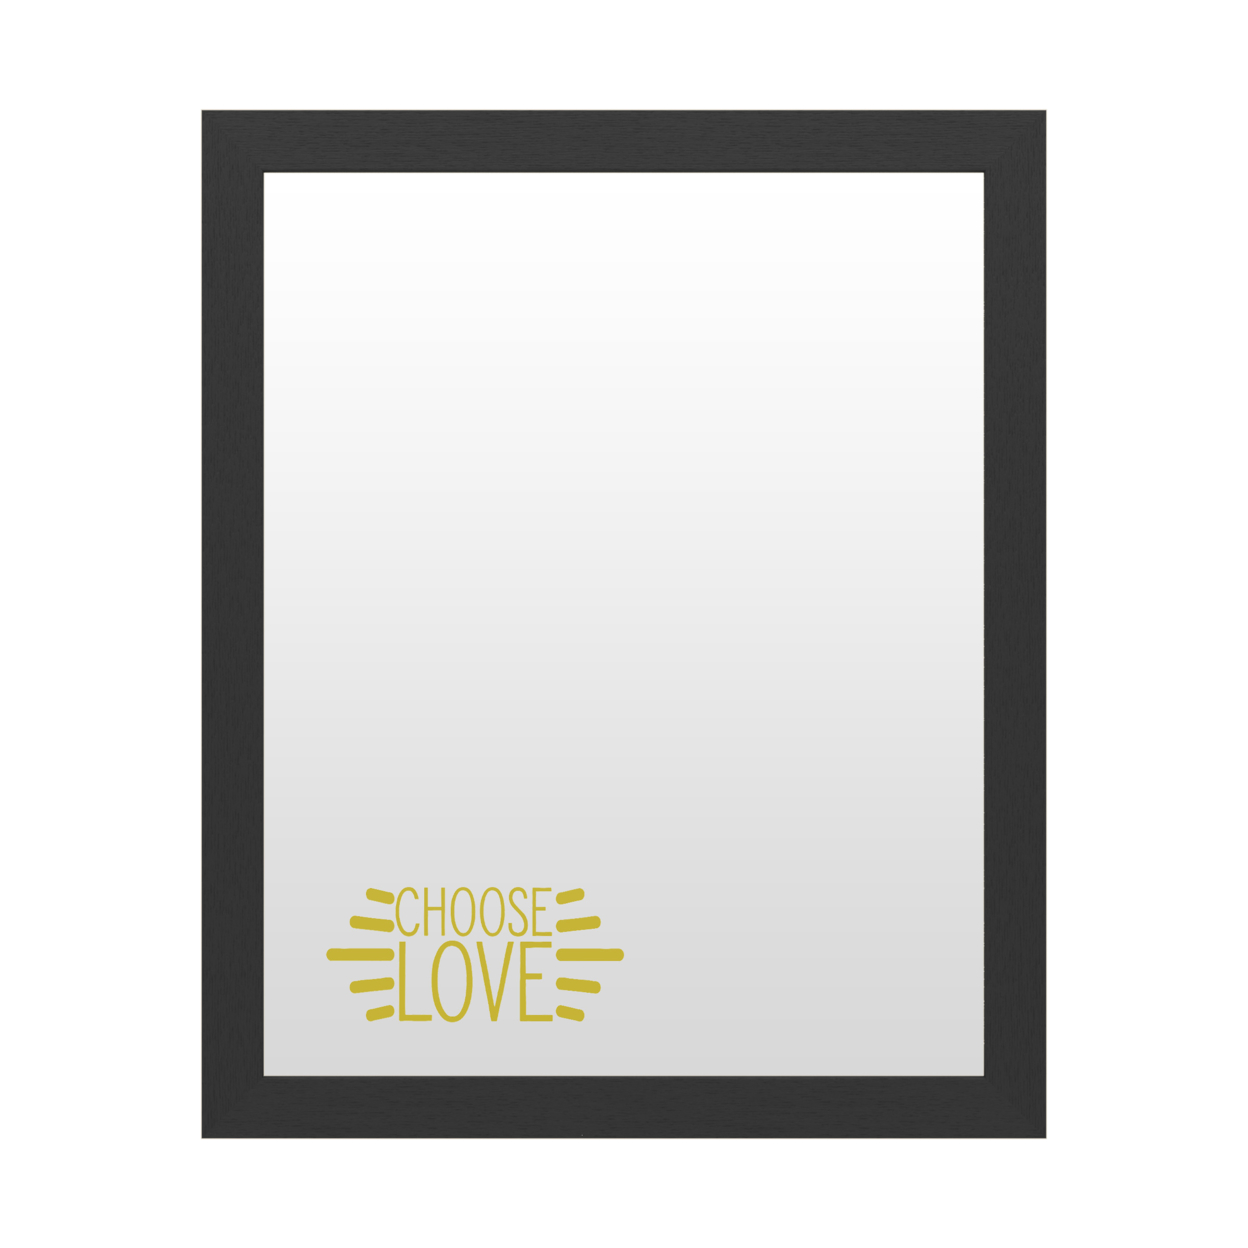 Dry Erase 16 X 20 Marker Board With Printed Artwork - Choose Love 2 White Board - Ready To Hang